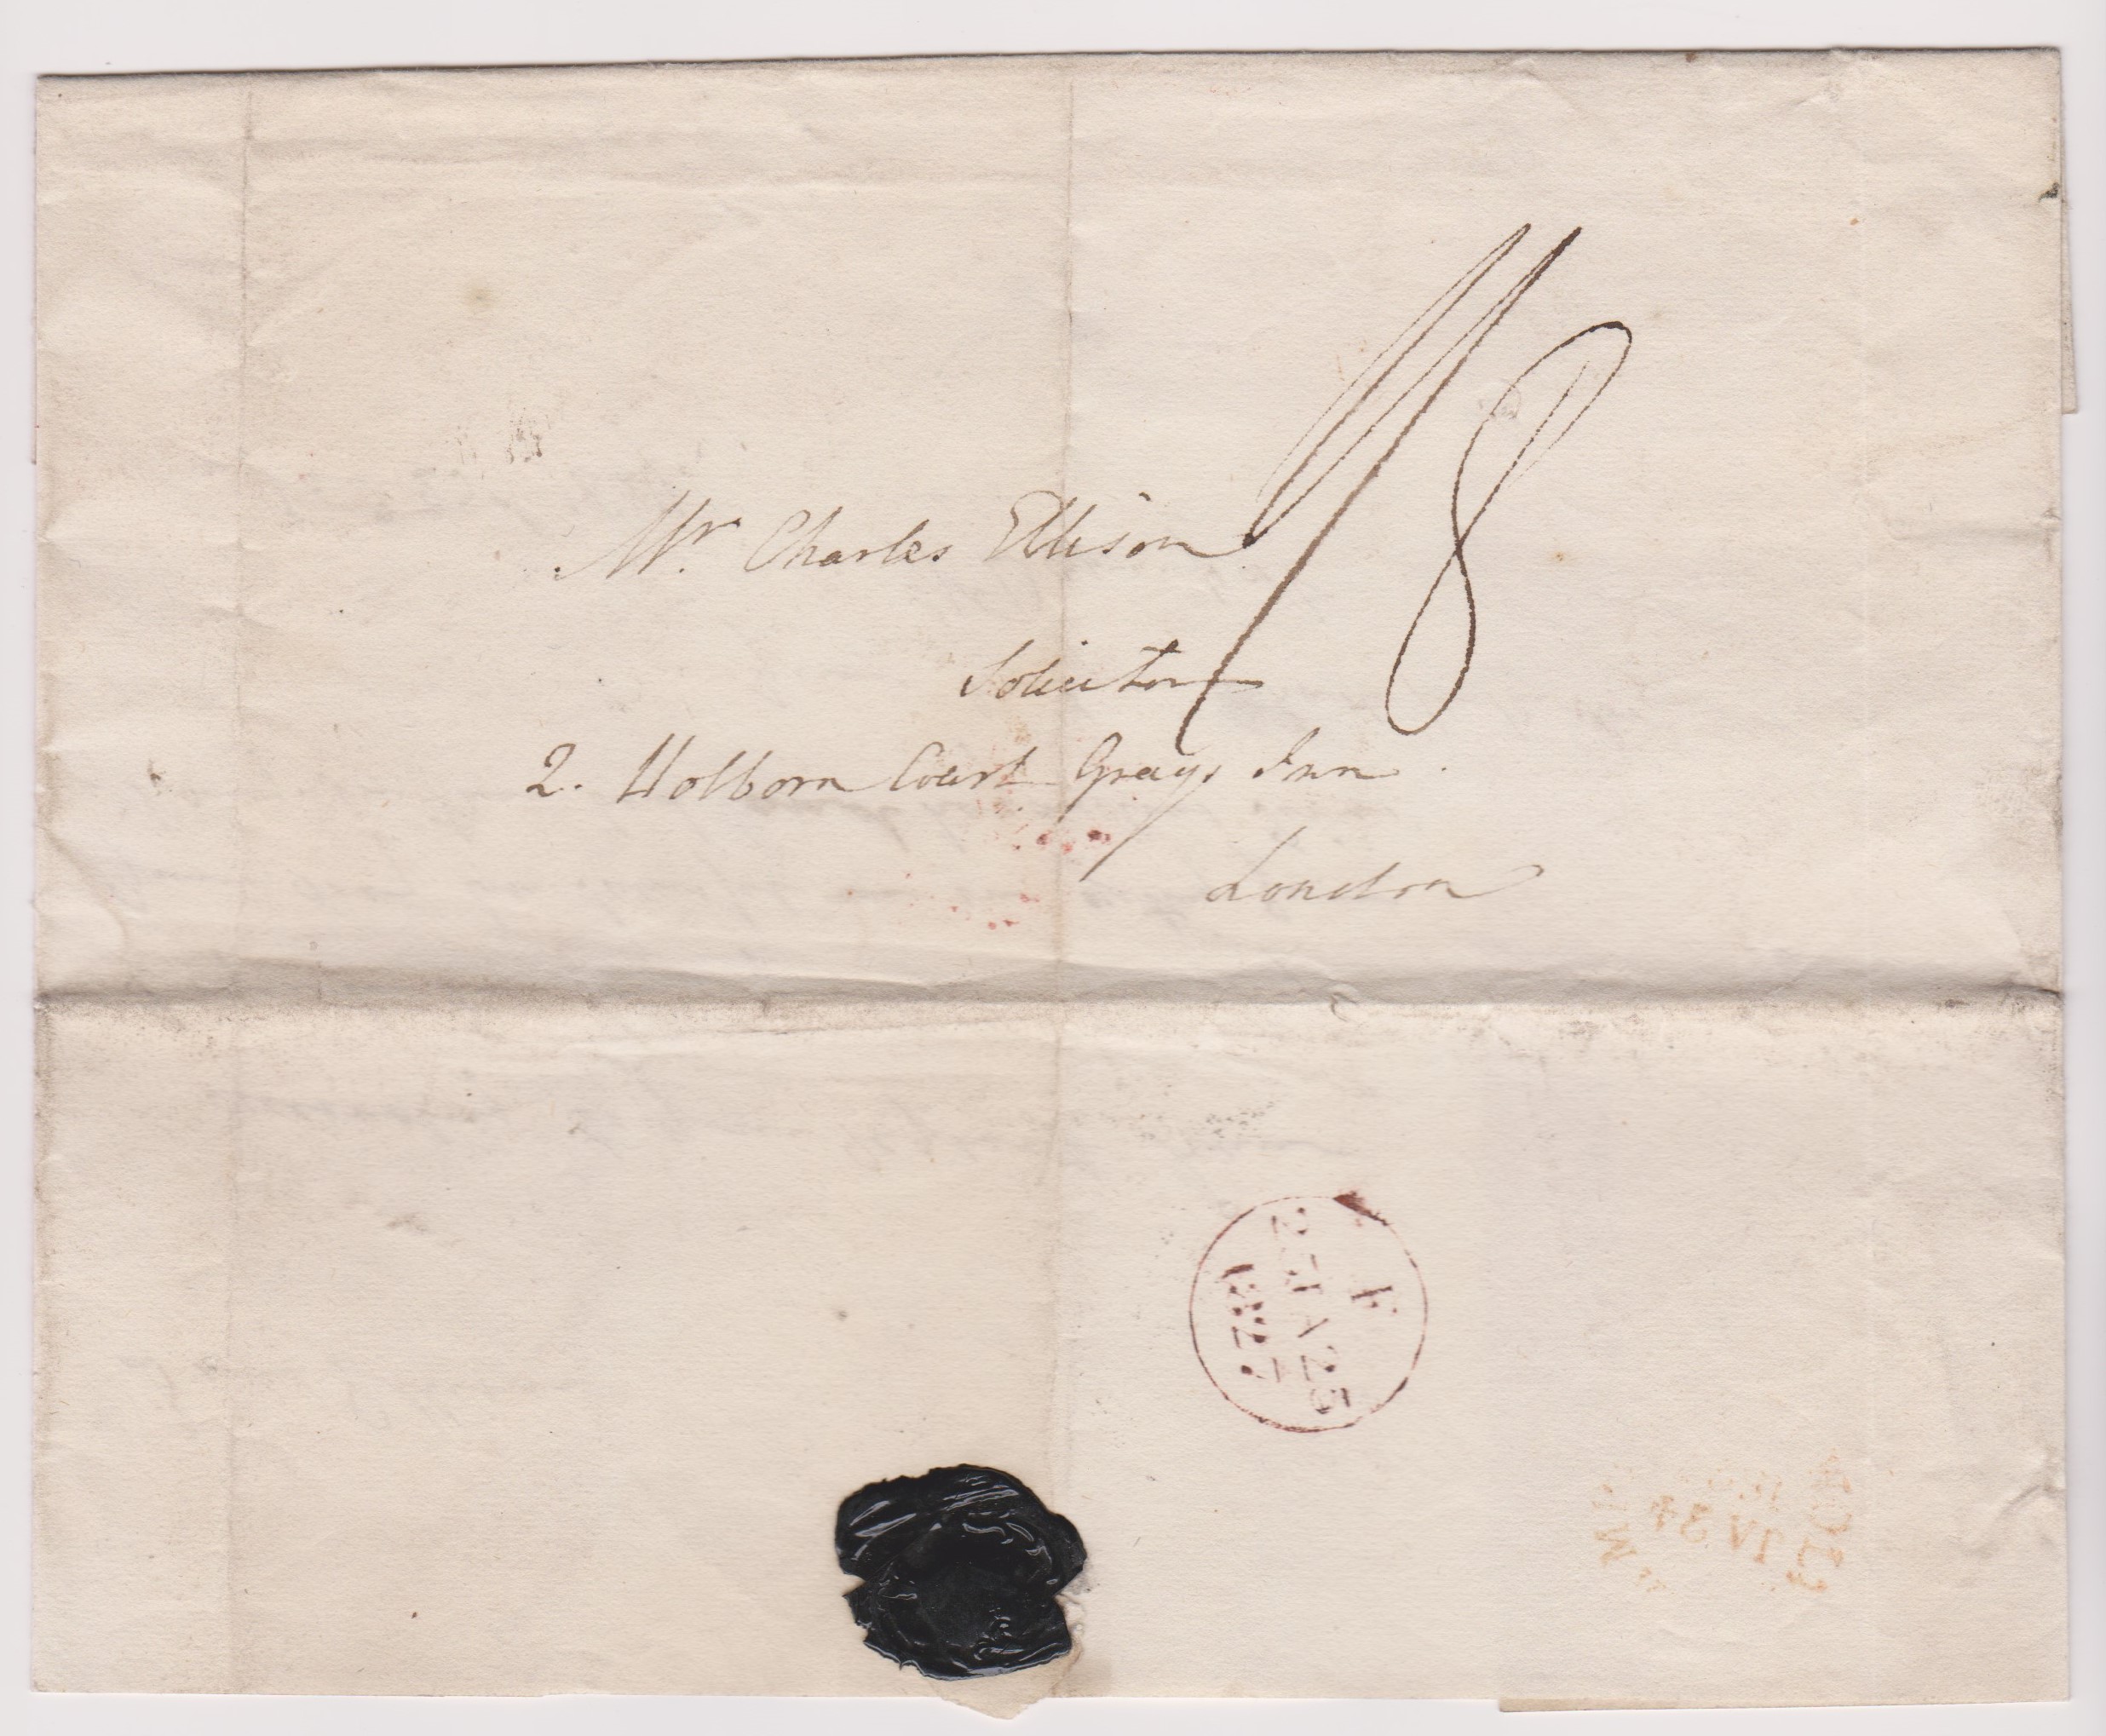 Great Britain 1827-Postal History-EL dated 23rd Jan 1827 posted to London partial Jan 24th 1827